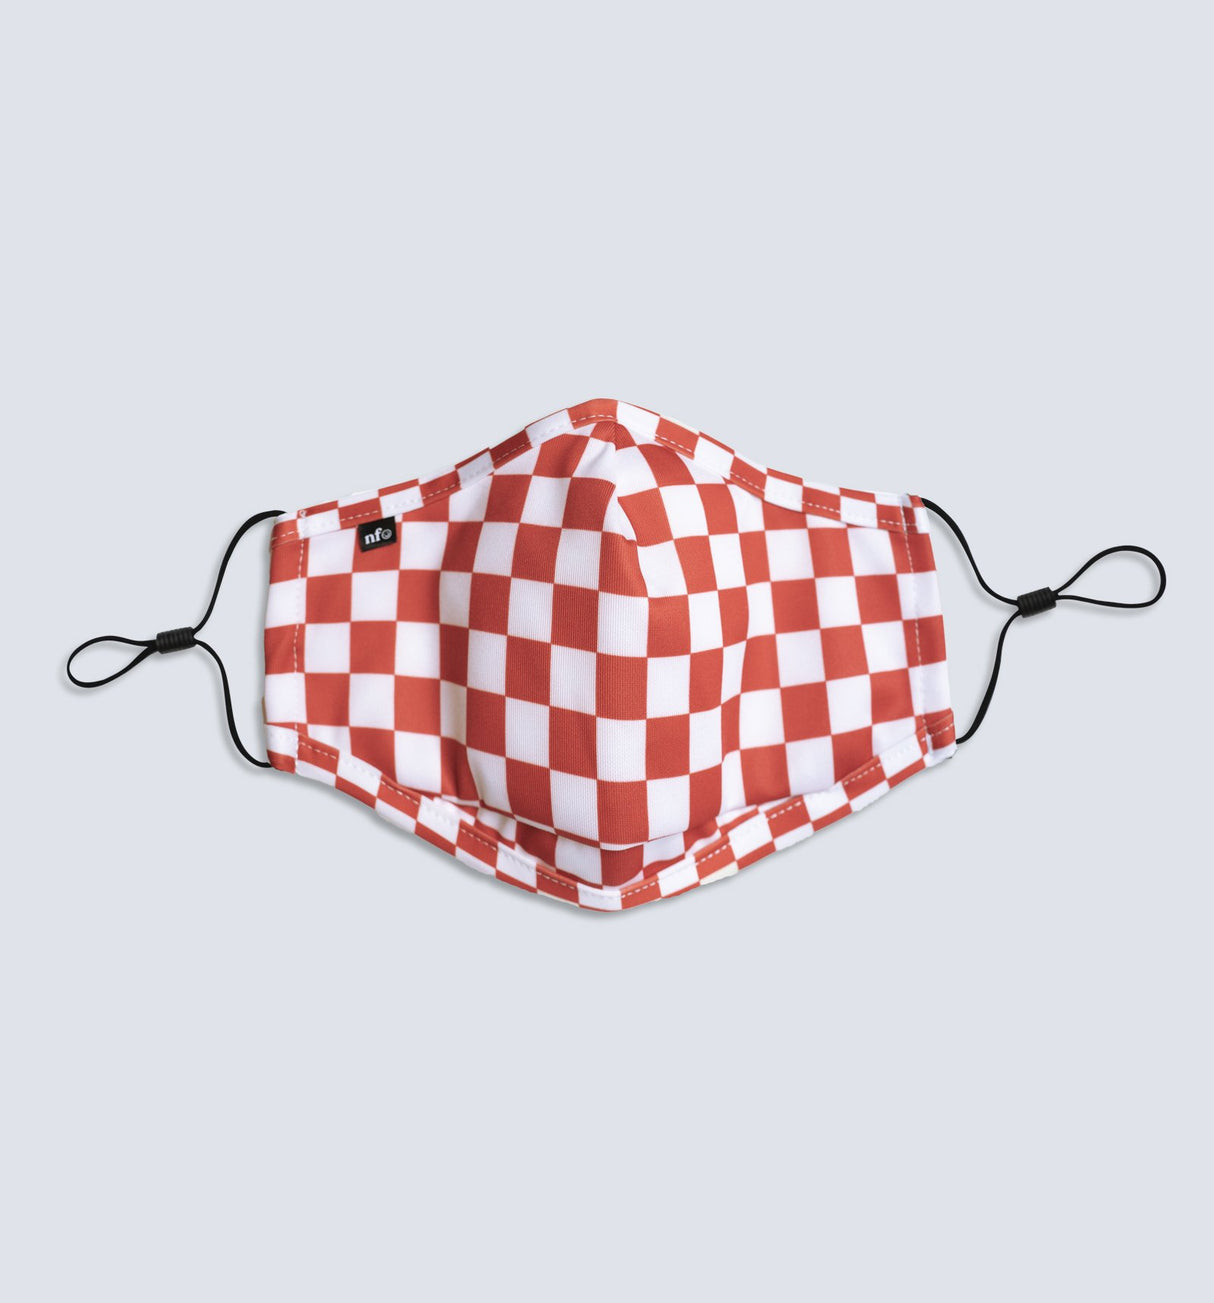 NiiceFace Checkerboard Red Face Mask